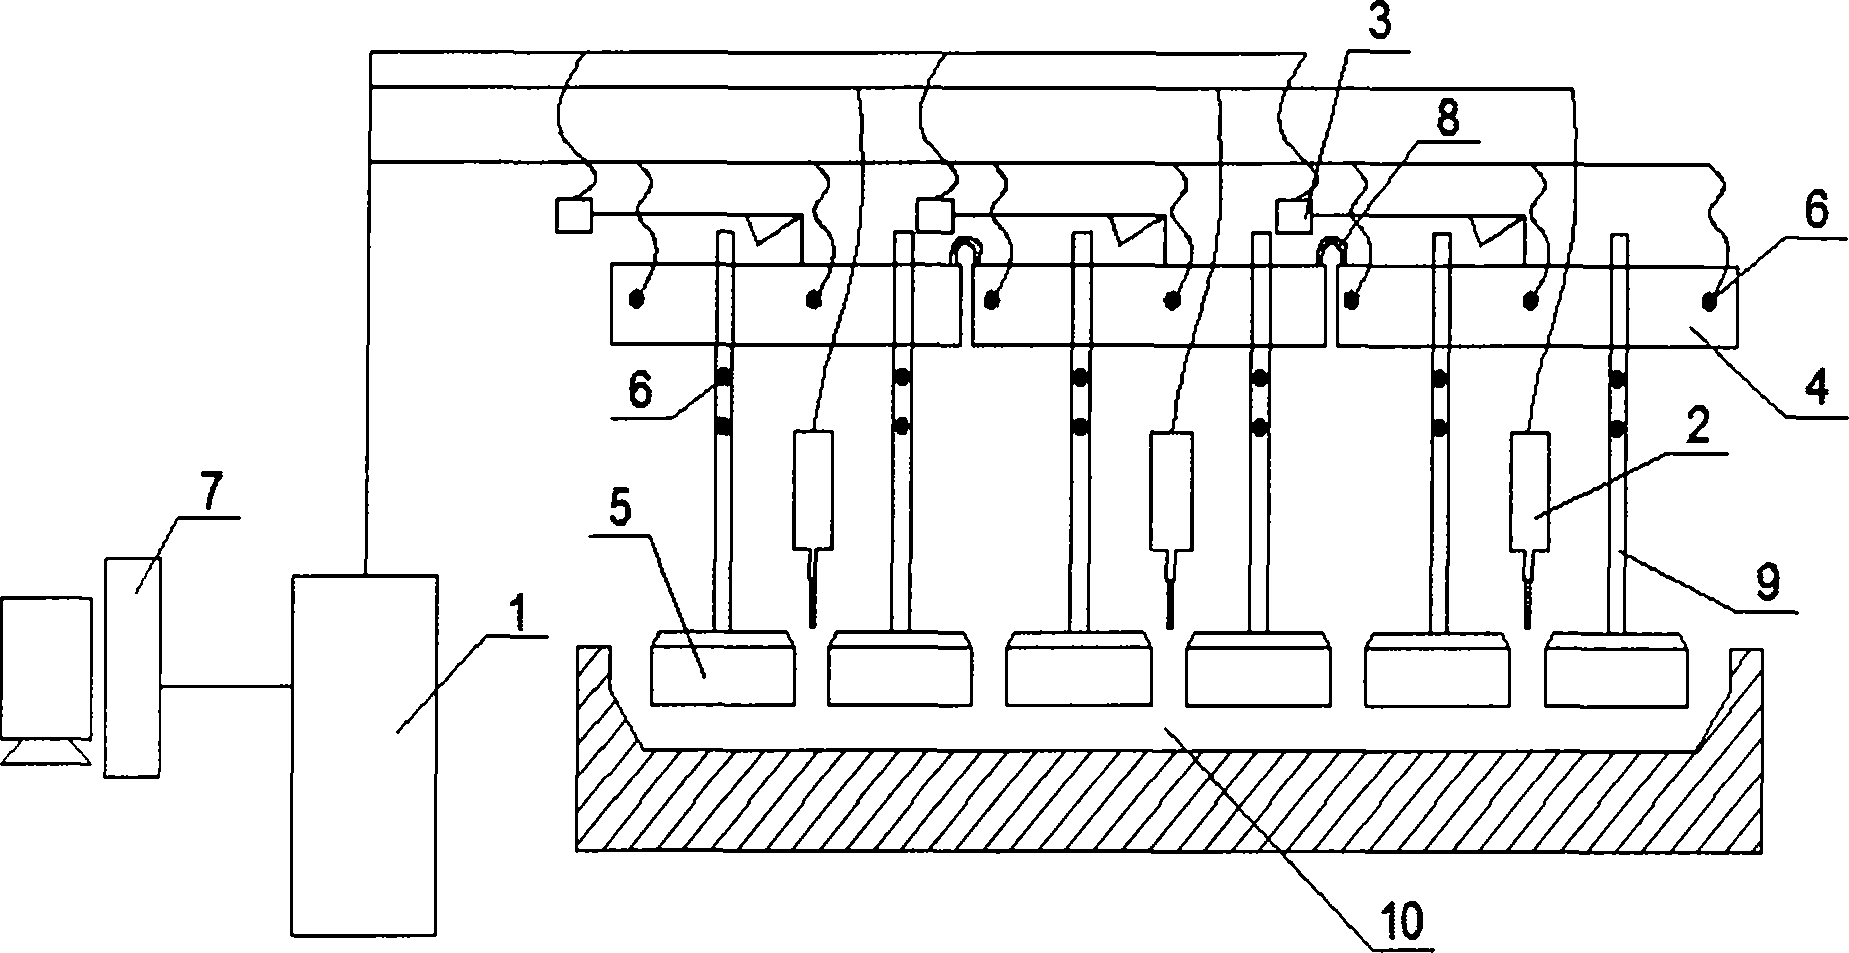 Aluminum electrolysis cell region control system and method